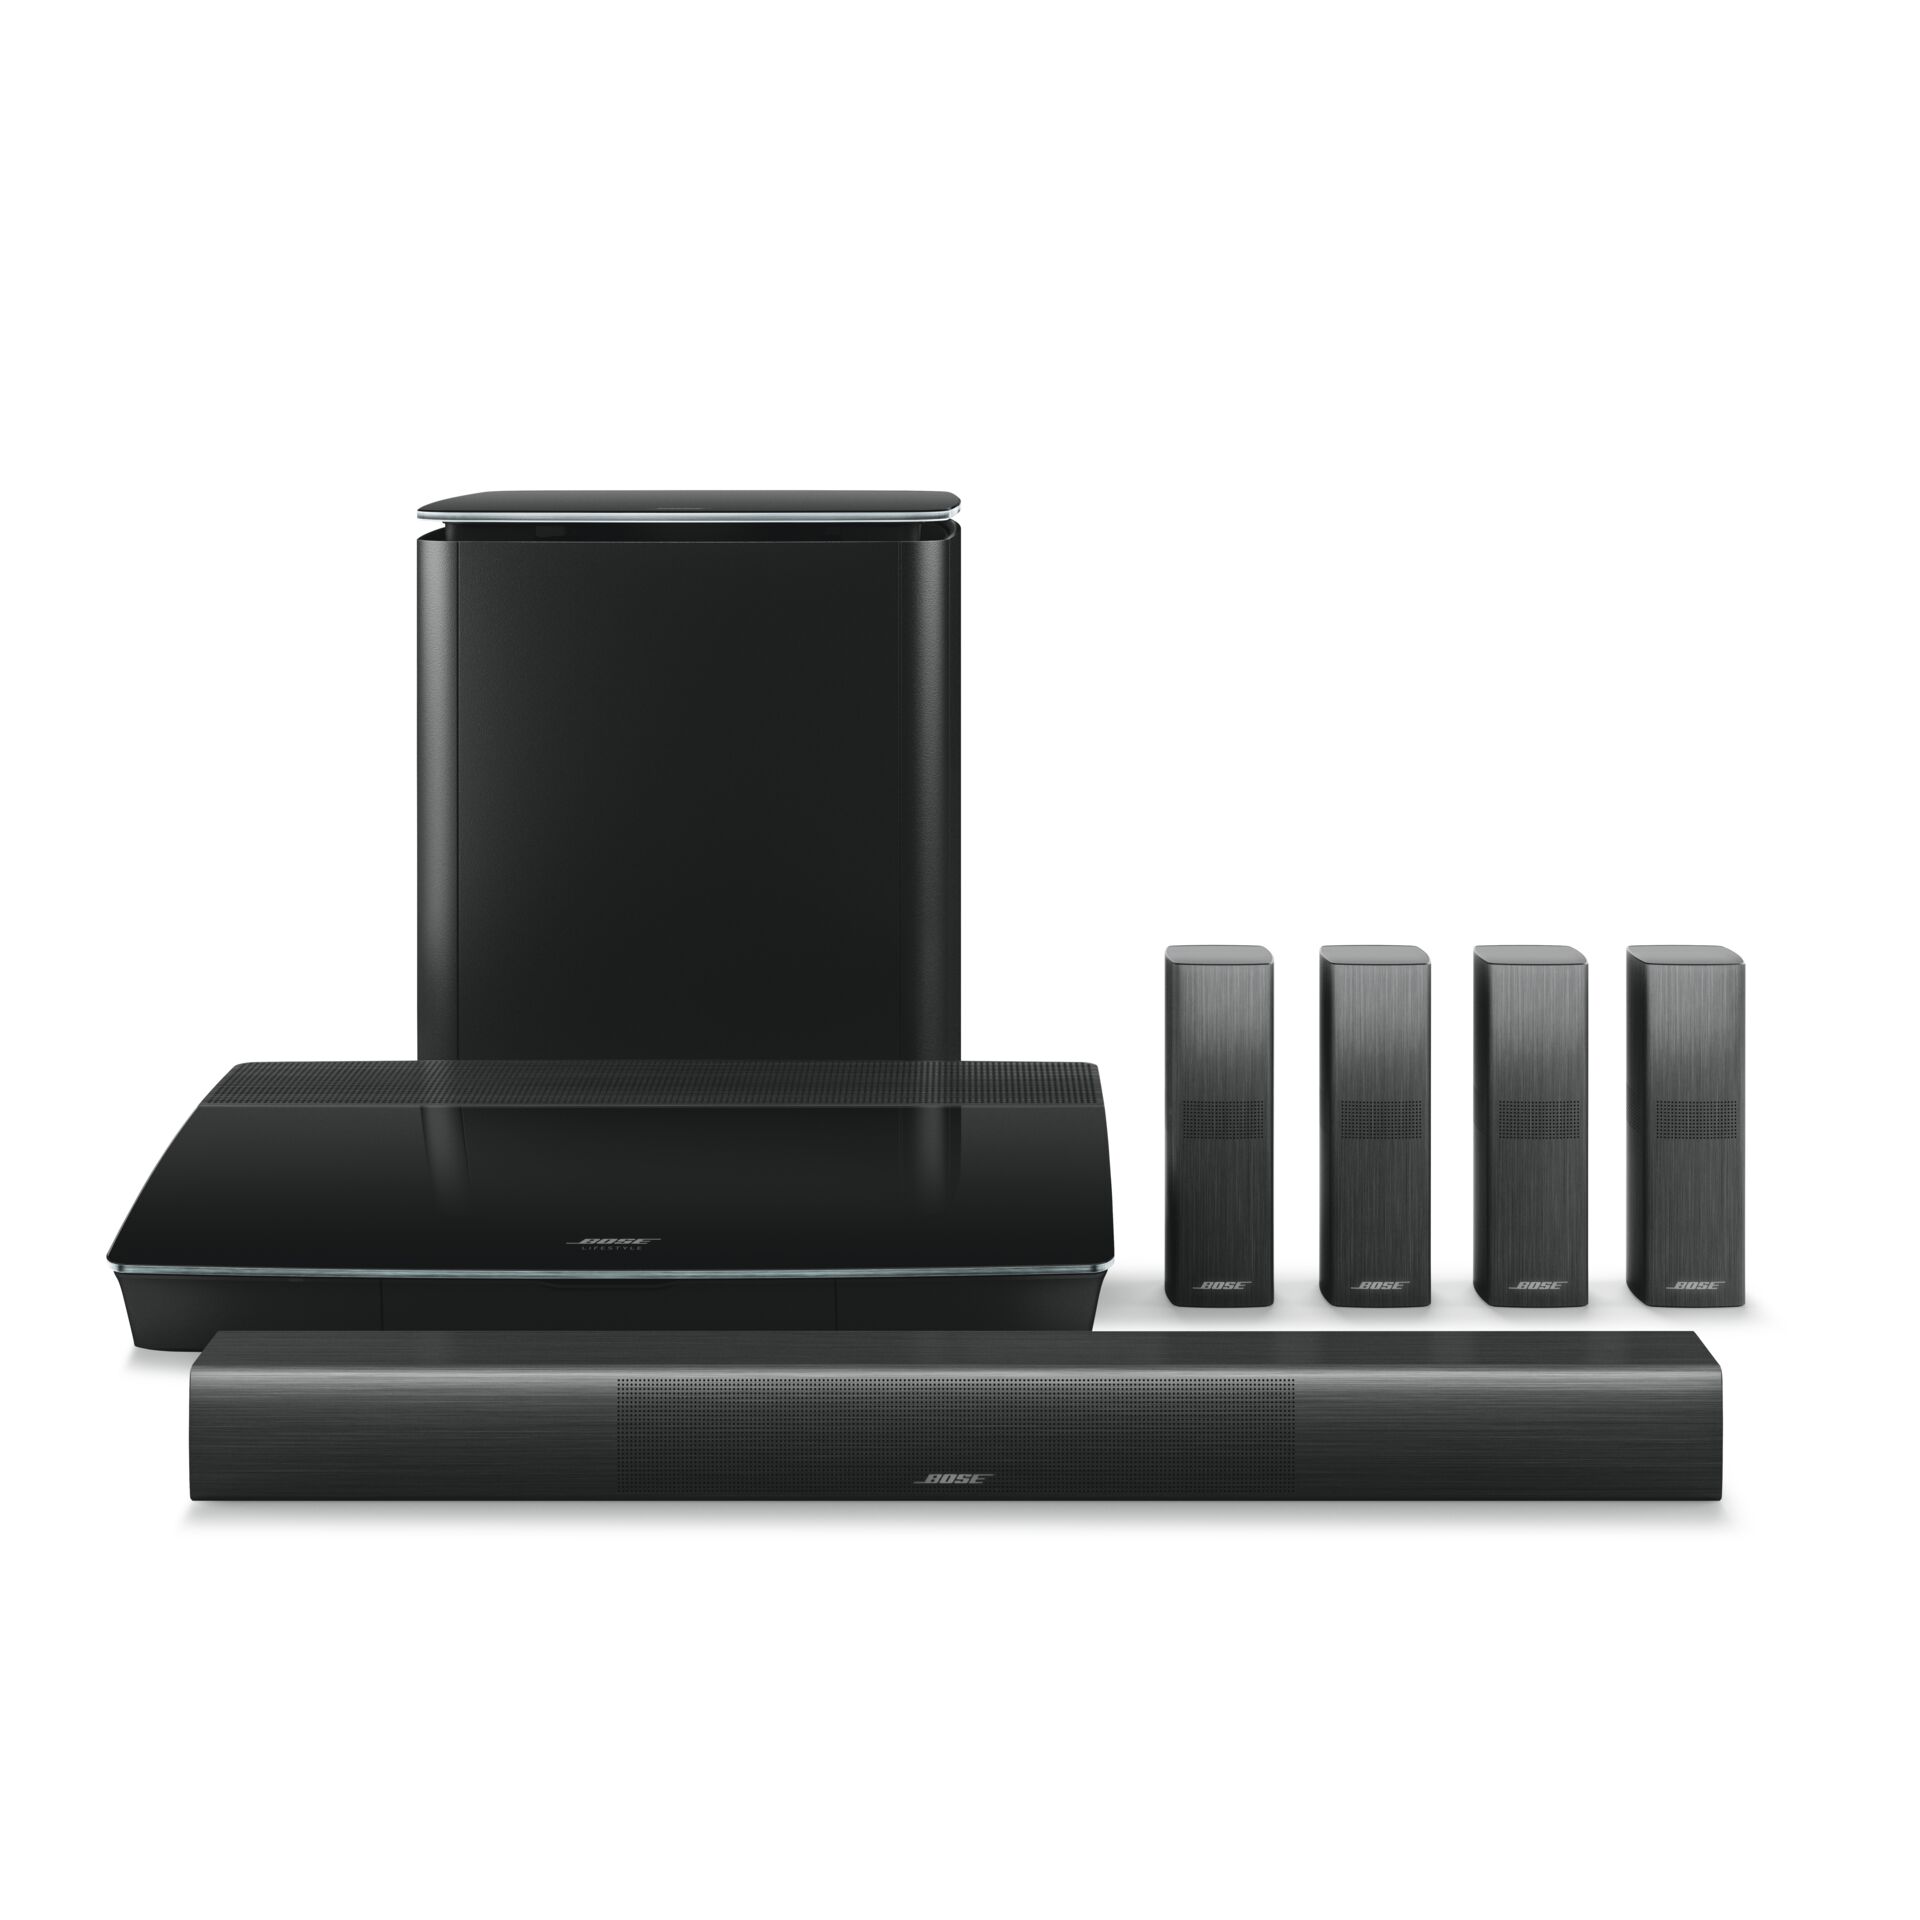 romantisk Ydeevne Mount Bank Bose Lifestyle 650 Home Entertainment System, Works With